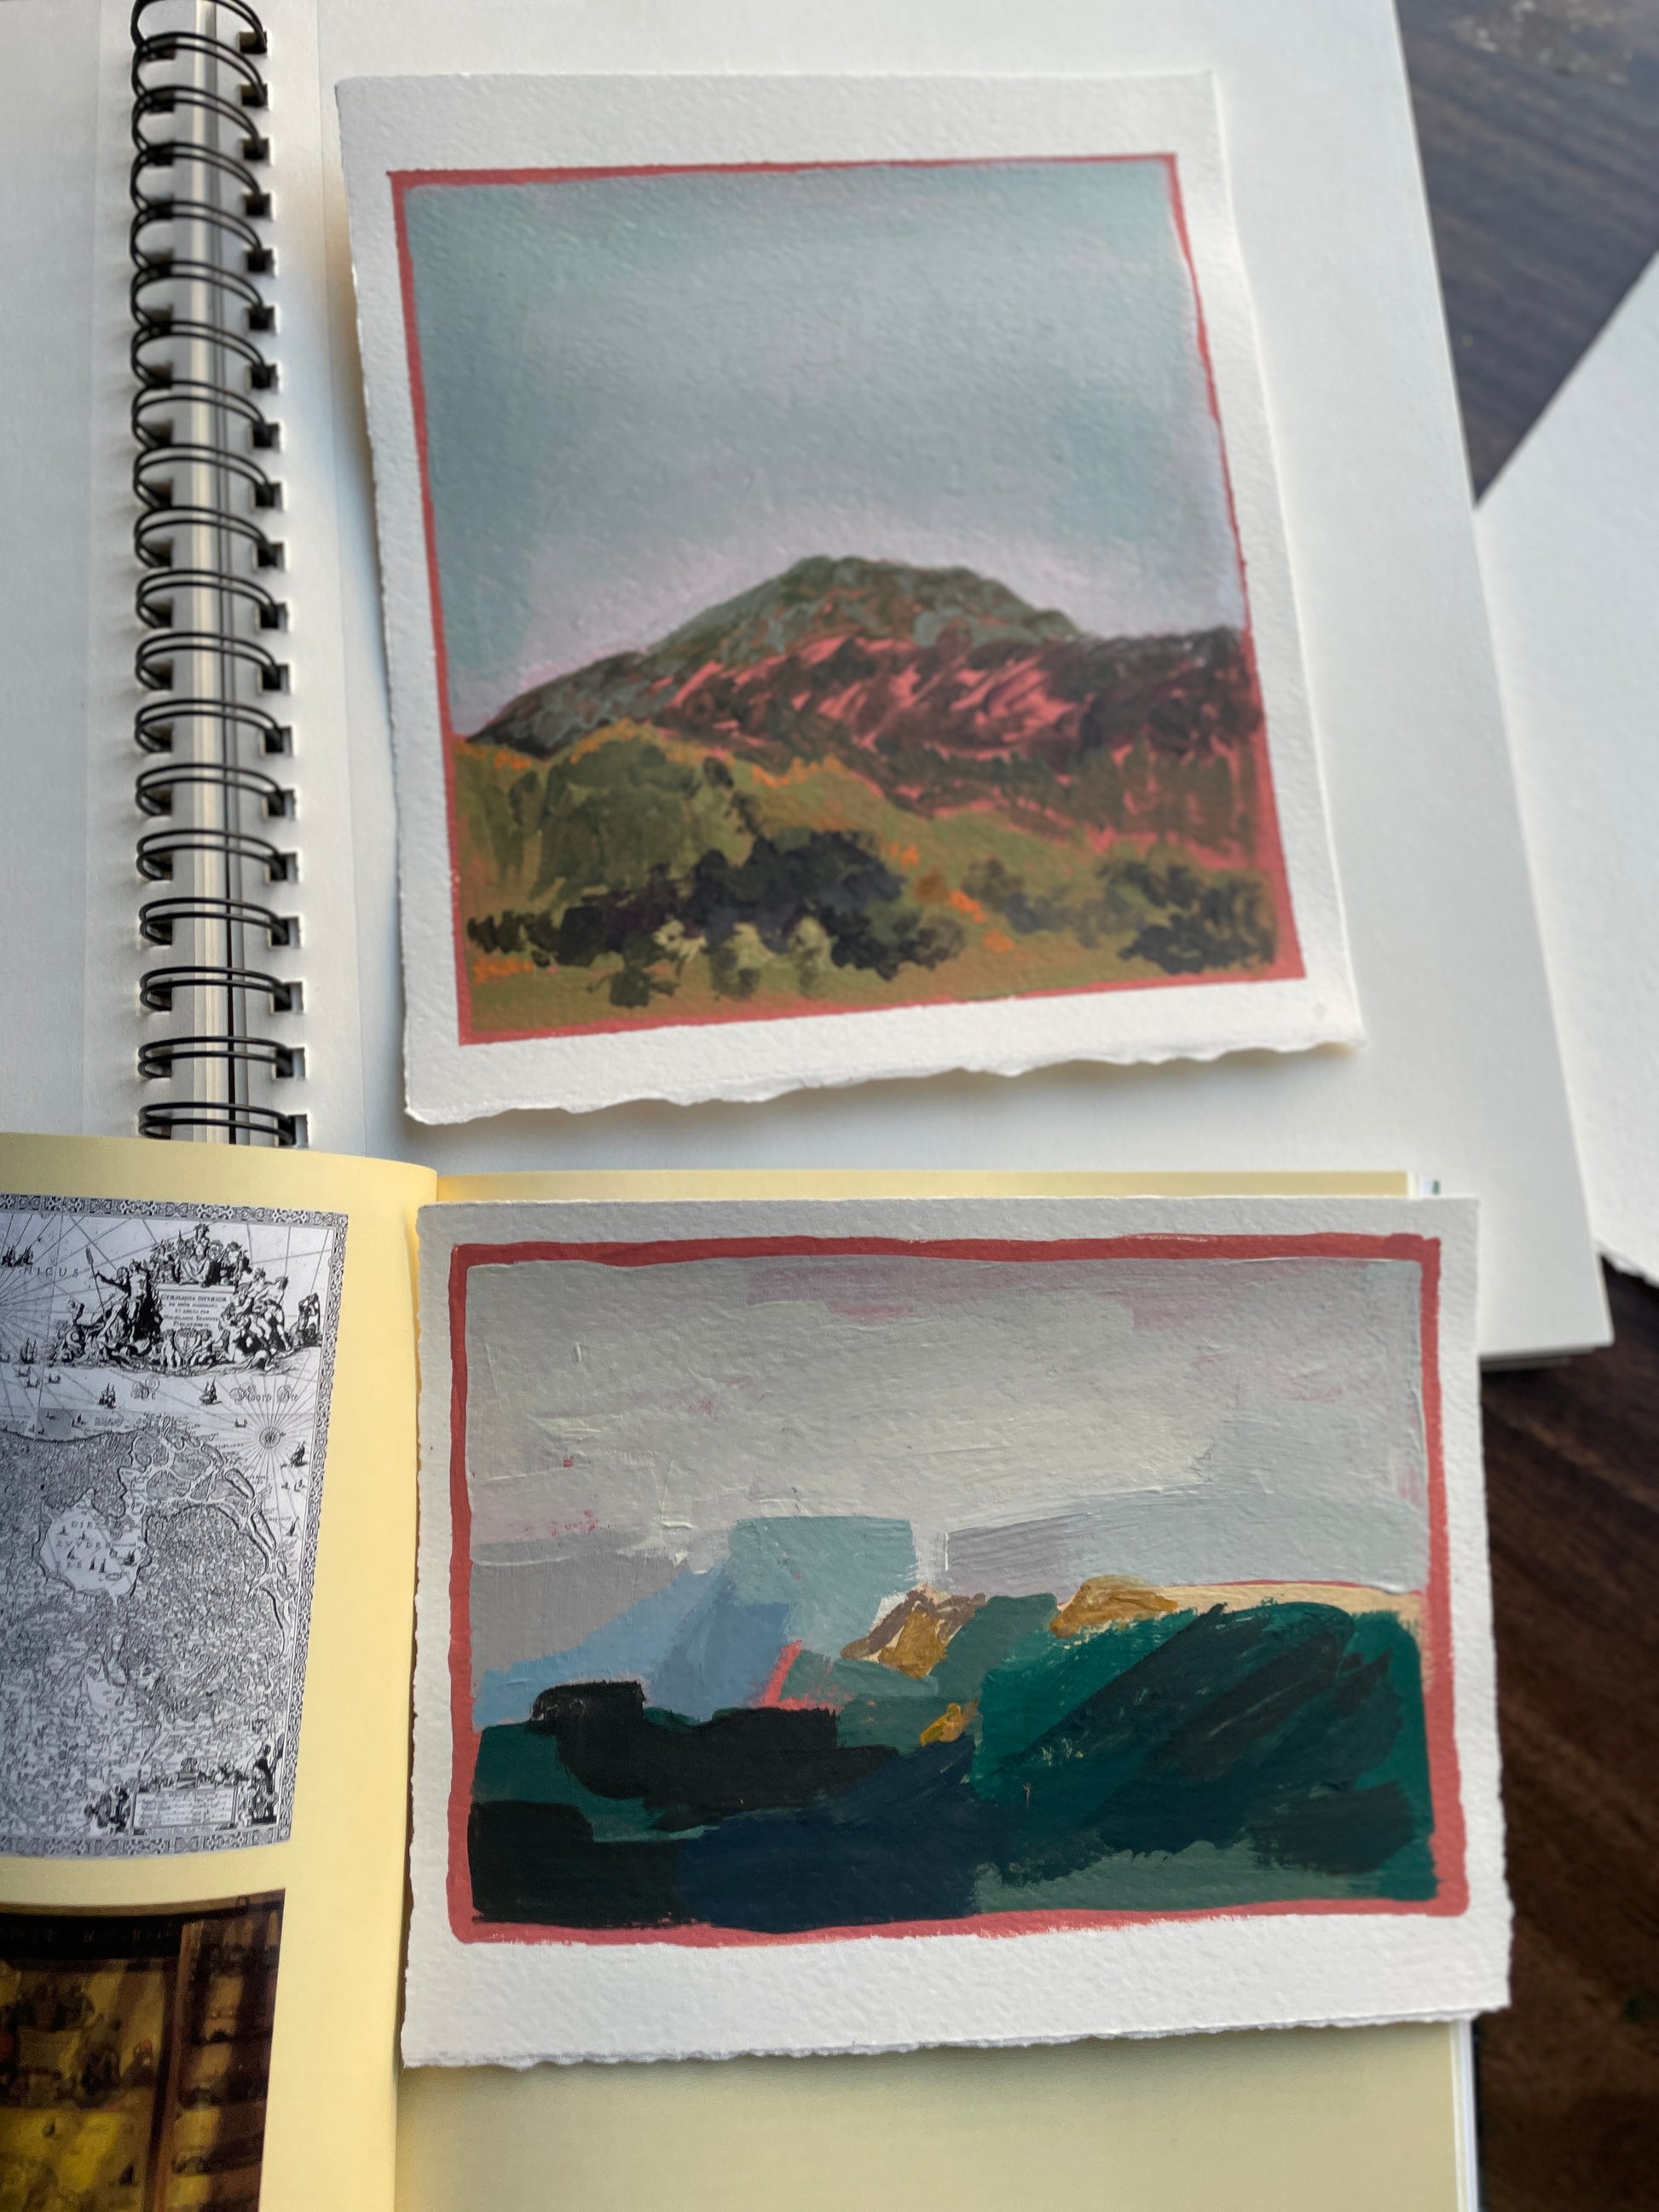 "Hand-painted California mountains with greenery and red underpainting"